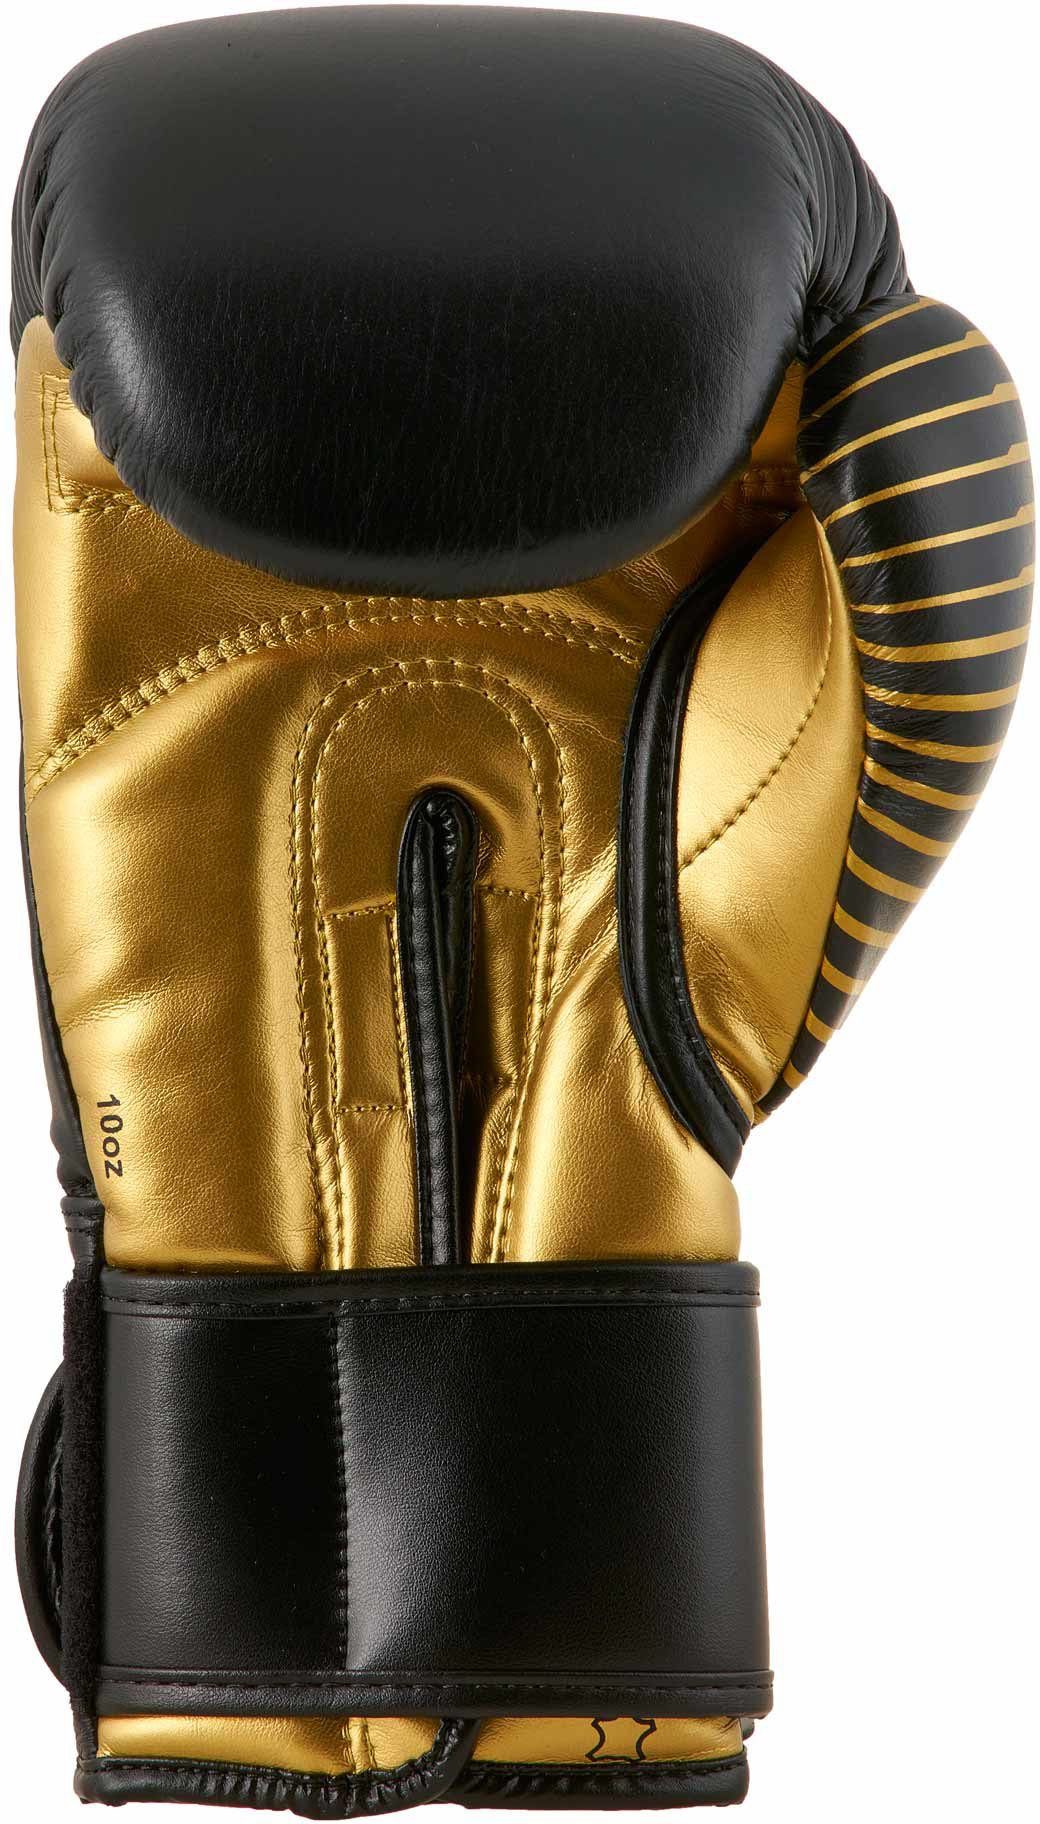 Competition adidas Performance Boxhandschuhe Handschuh black/gold